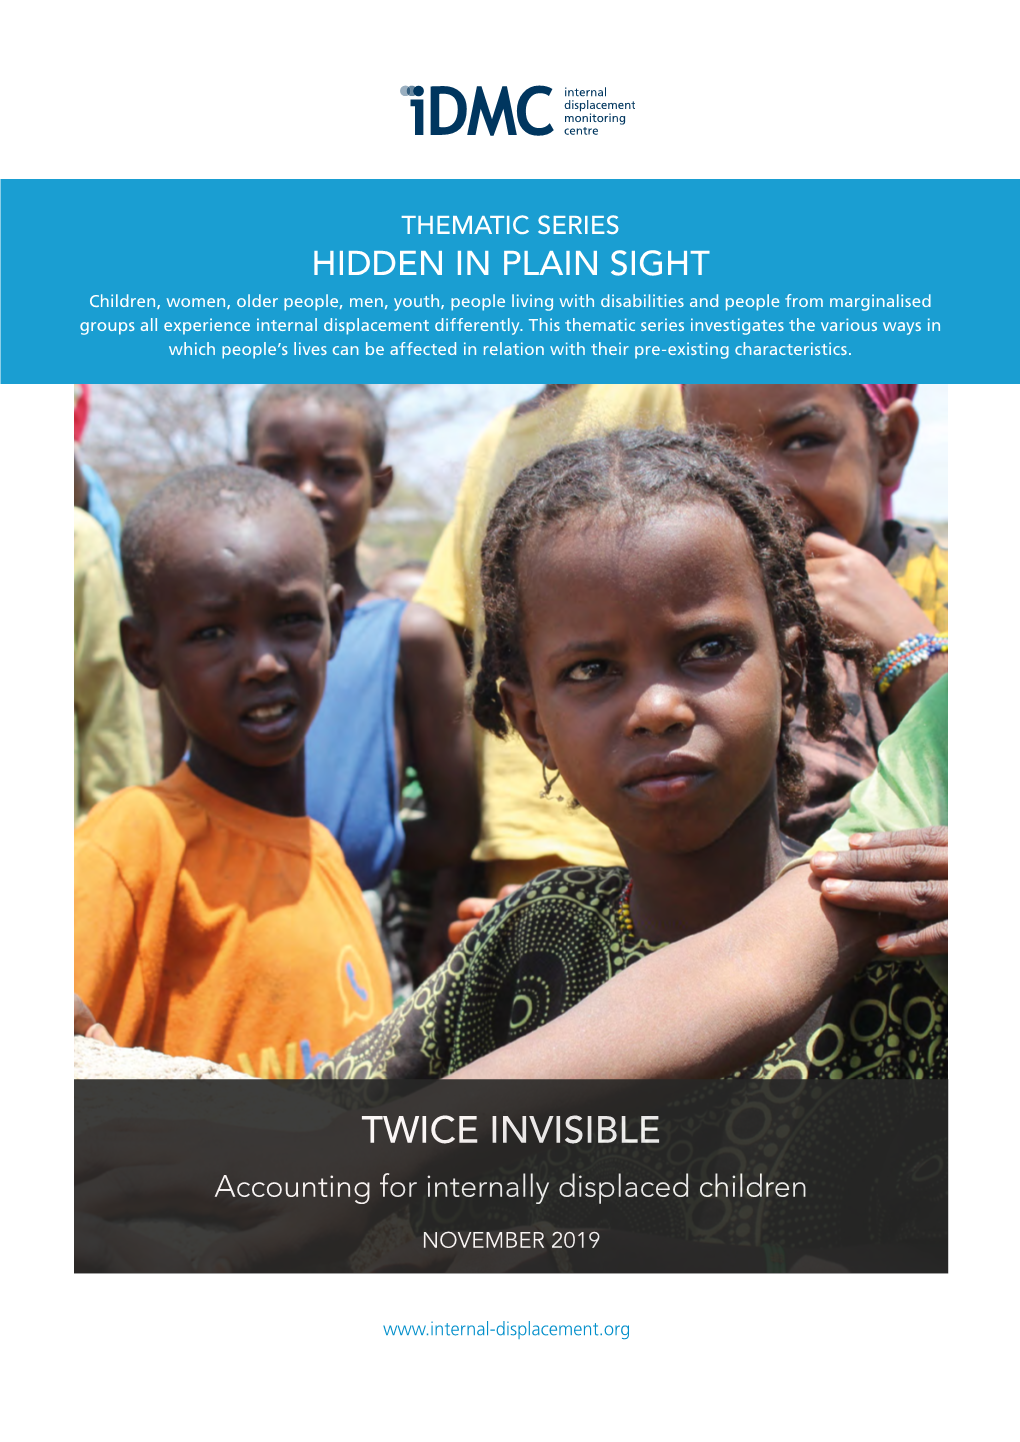 TWICE INVISIBLE Accounting for Internally Displaced Children